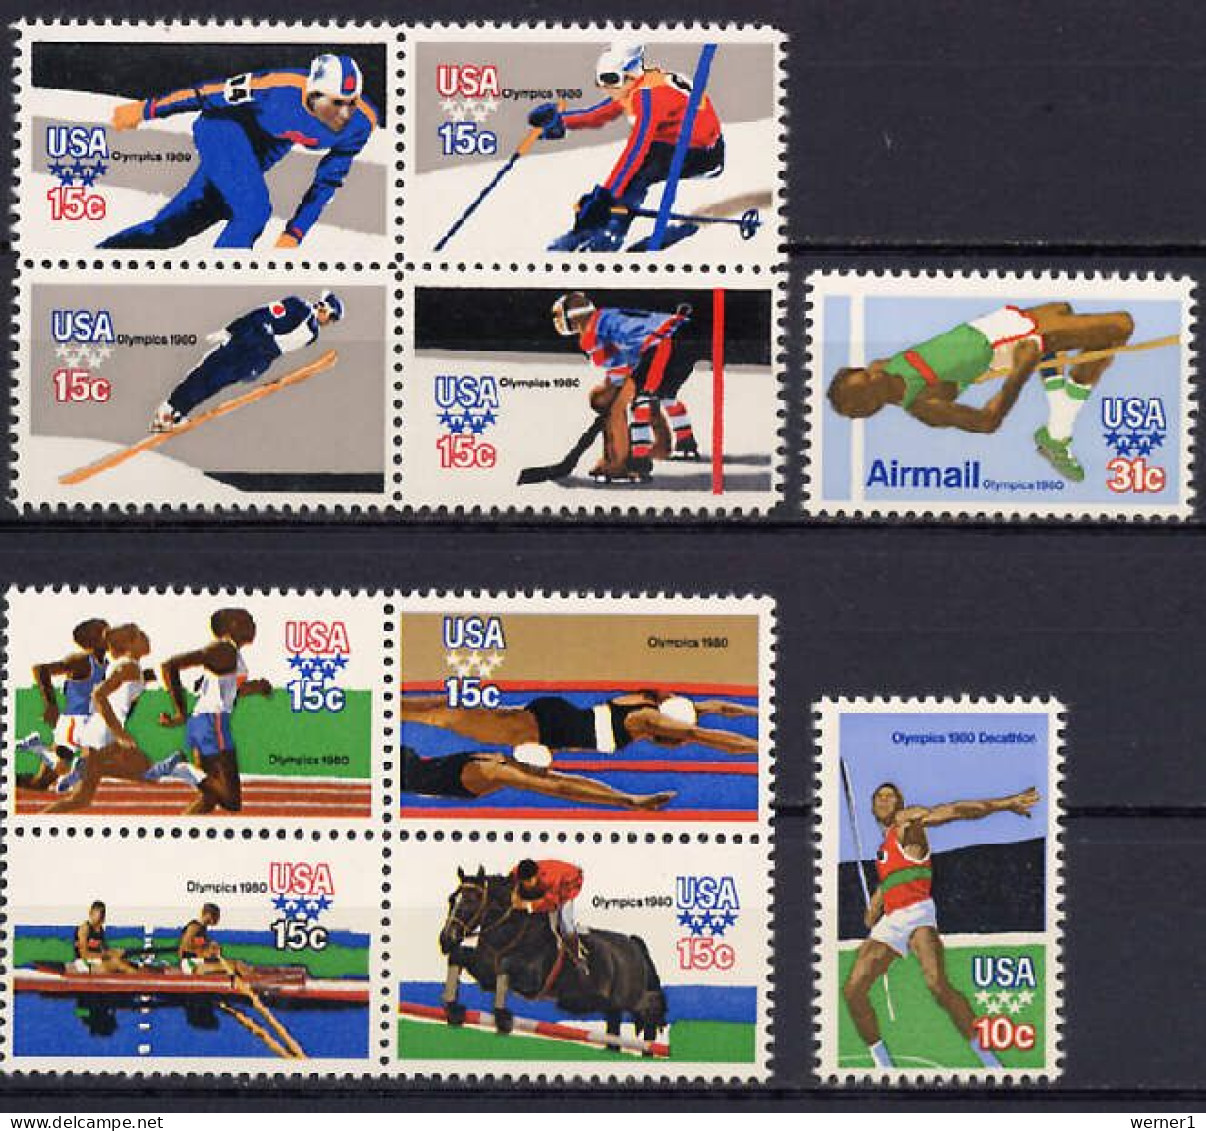 USA 1979/1980 Olympic Games Moscow / Lake Placid 10 Stamps MNH - Ete 1980: Moscou